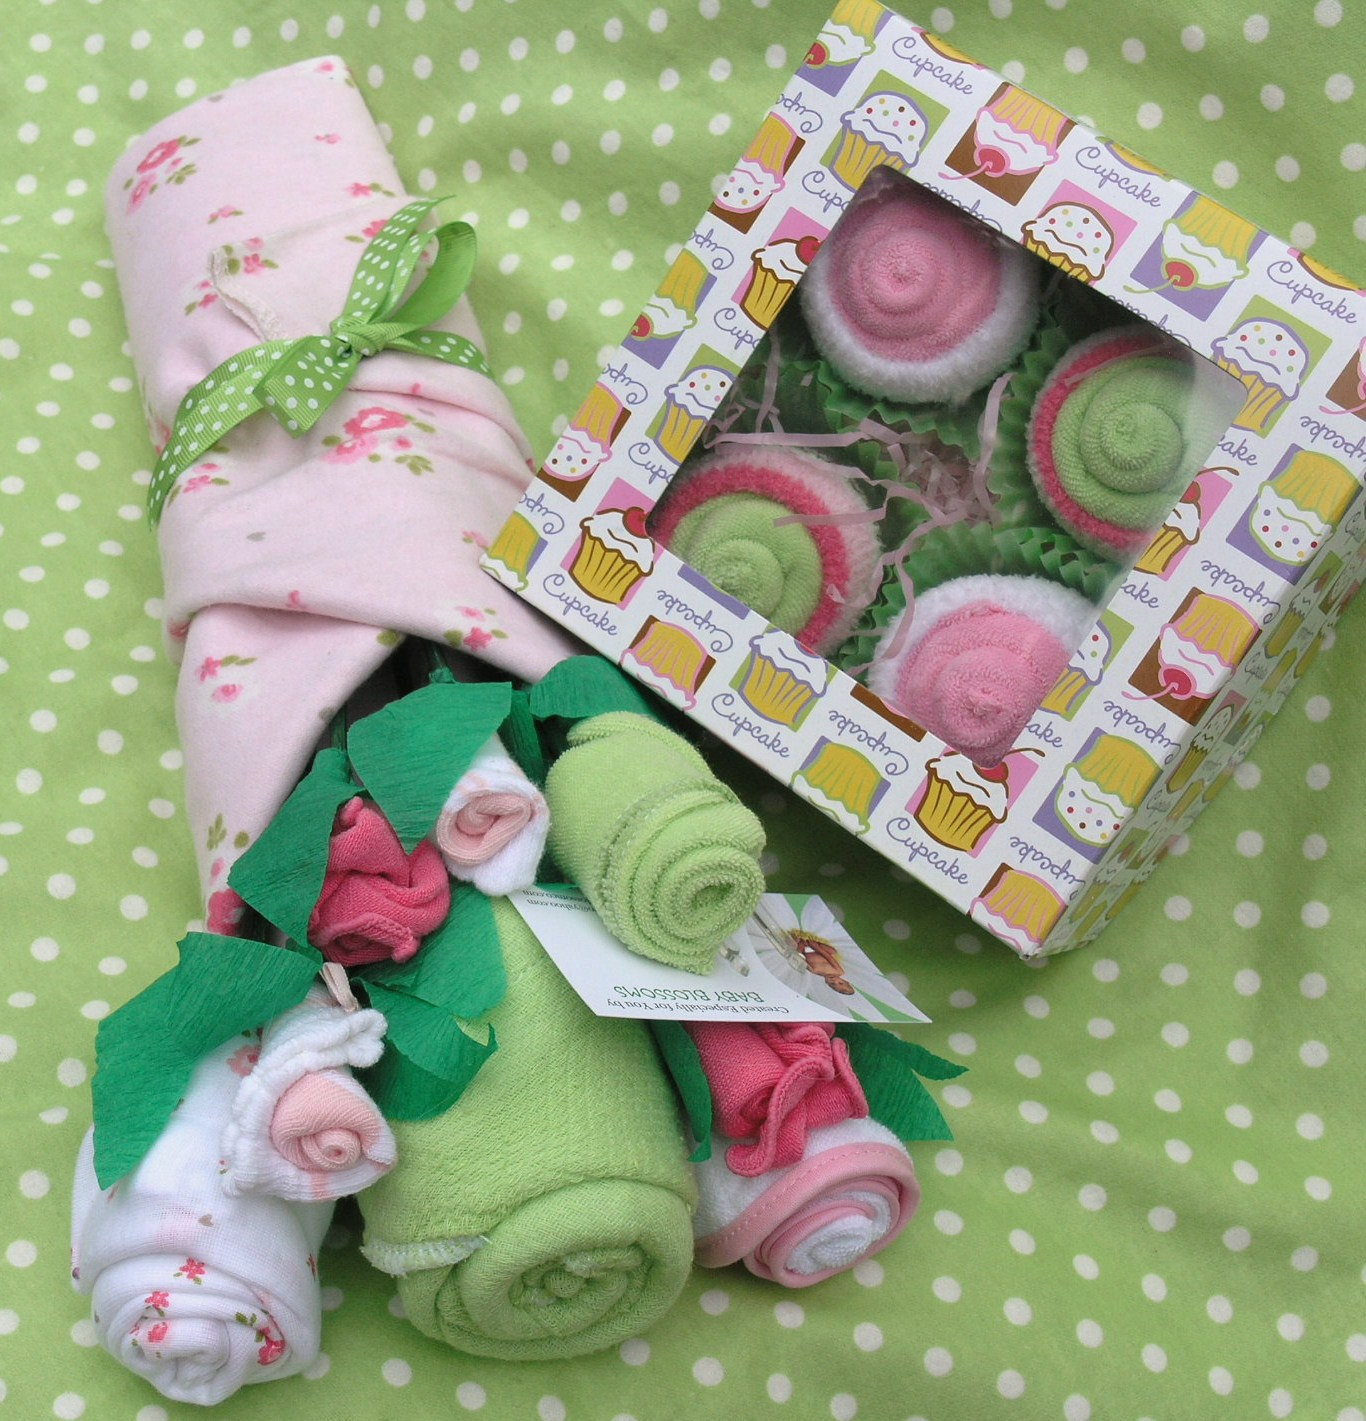 Baby Clothes Cupcakes
 Unique Baby Shower Gift Baby Girl Clothing by babyblossomco